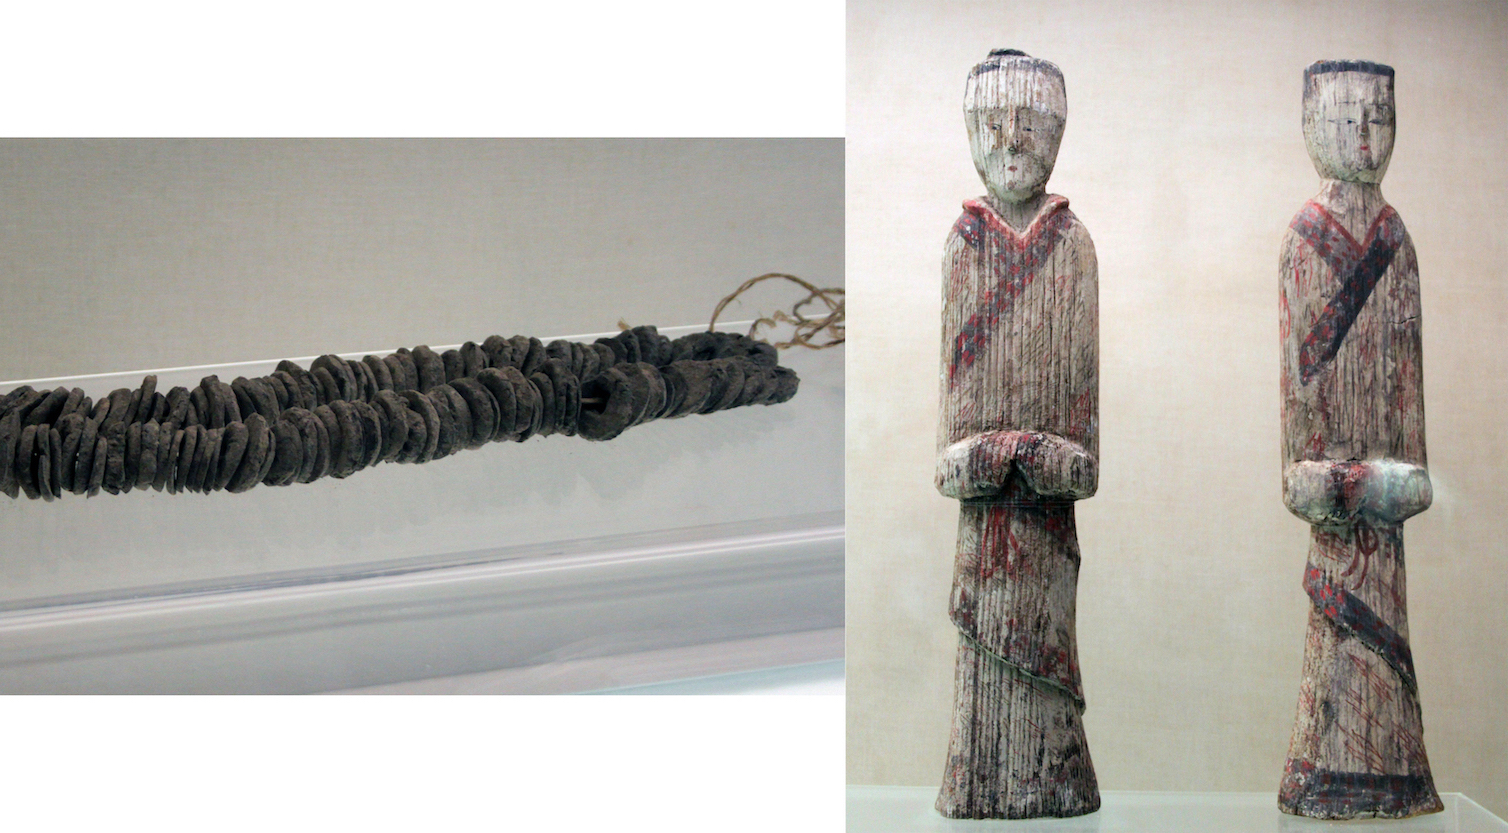 Examples of mingqi: clay replicas of coins (left) and painted tomb figurines made of wood (right), Tomb 1 at Mawangdui, Changsha, Hunan Province, 2nd century B.C.E. (Photos by Gary Todd).